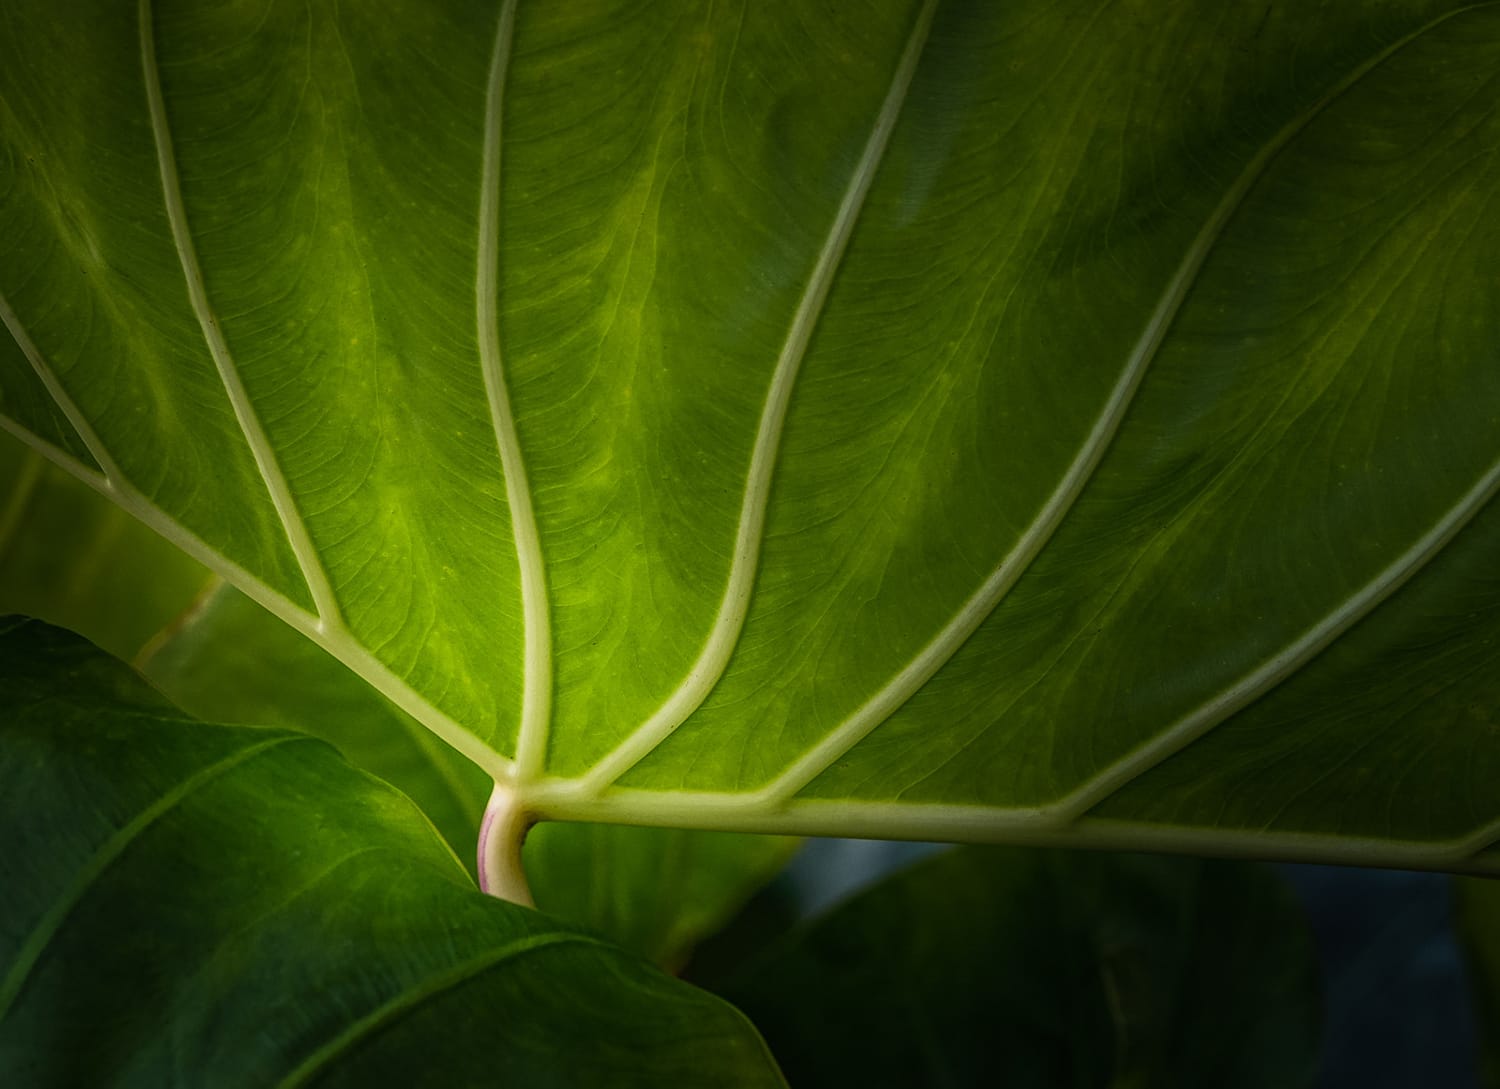 Final image of leaf with dramatic light added in post-processing